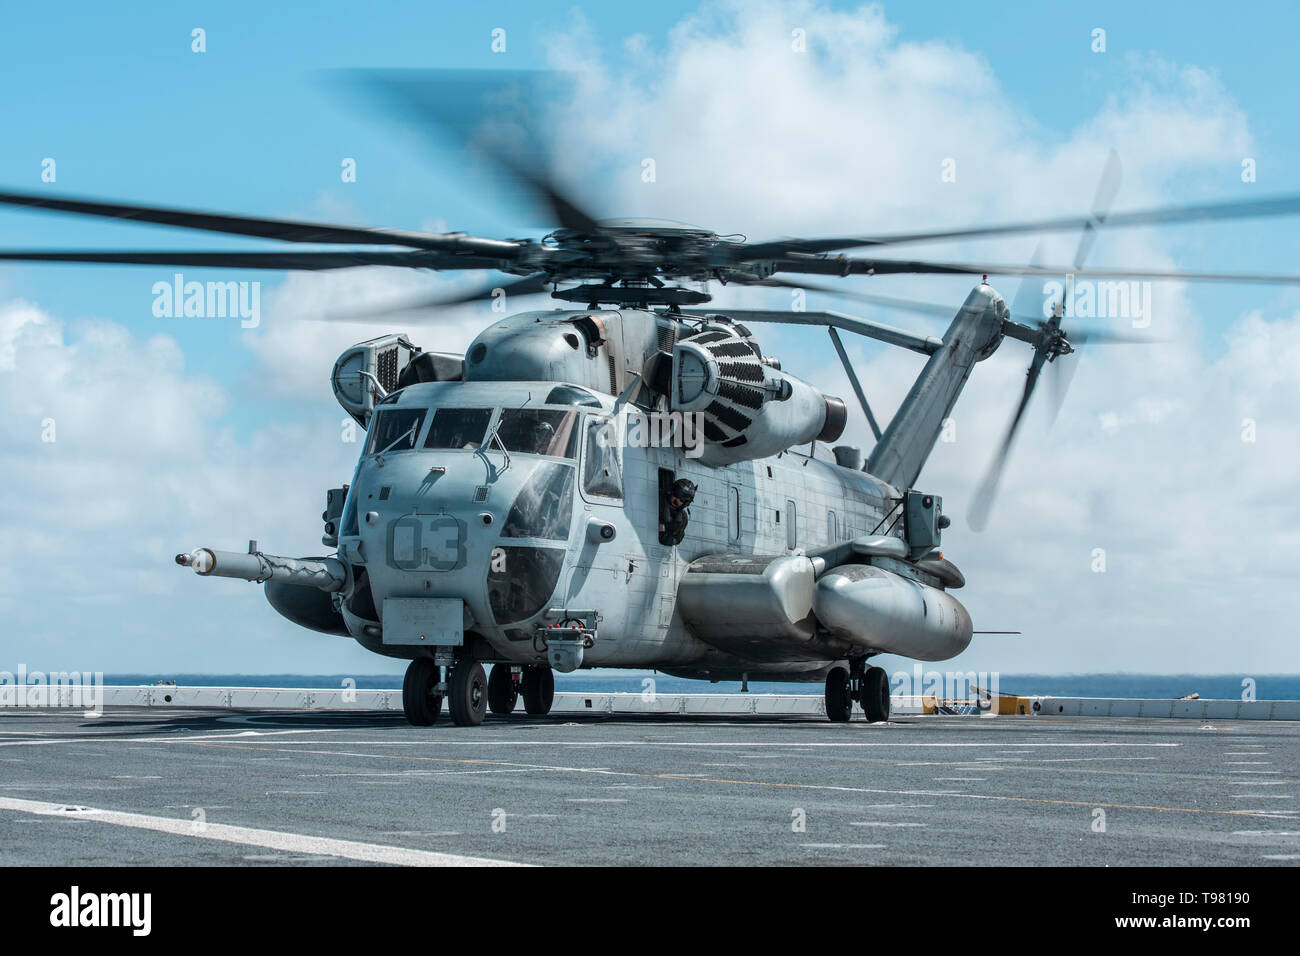 190513-M-QS181-0020 PACIFIC OCEAN (May 13, 2019) U.S. Marines with Marine Aircraft Group (MAG) 24 land a CH-53 Super Stallion on the flight deck of the San Antonio-class amphibious transport dock ship USS John P. Murtha (LPD 26). The Marines and Sailors of the 11th Marine Expeditionary Unit are conducting routine operations as part of the Boxer Amphibious Ready Group. (U.S. Marine Corps photo by Cpl. Jason Monty) Stock Photo